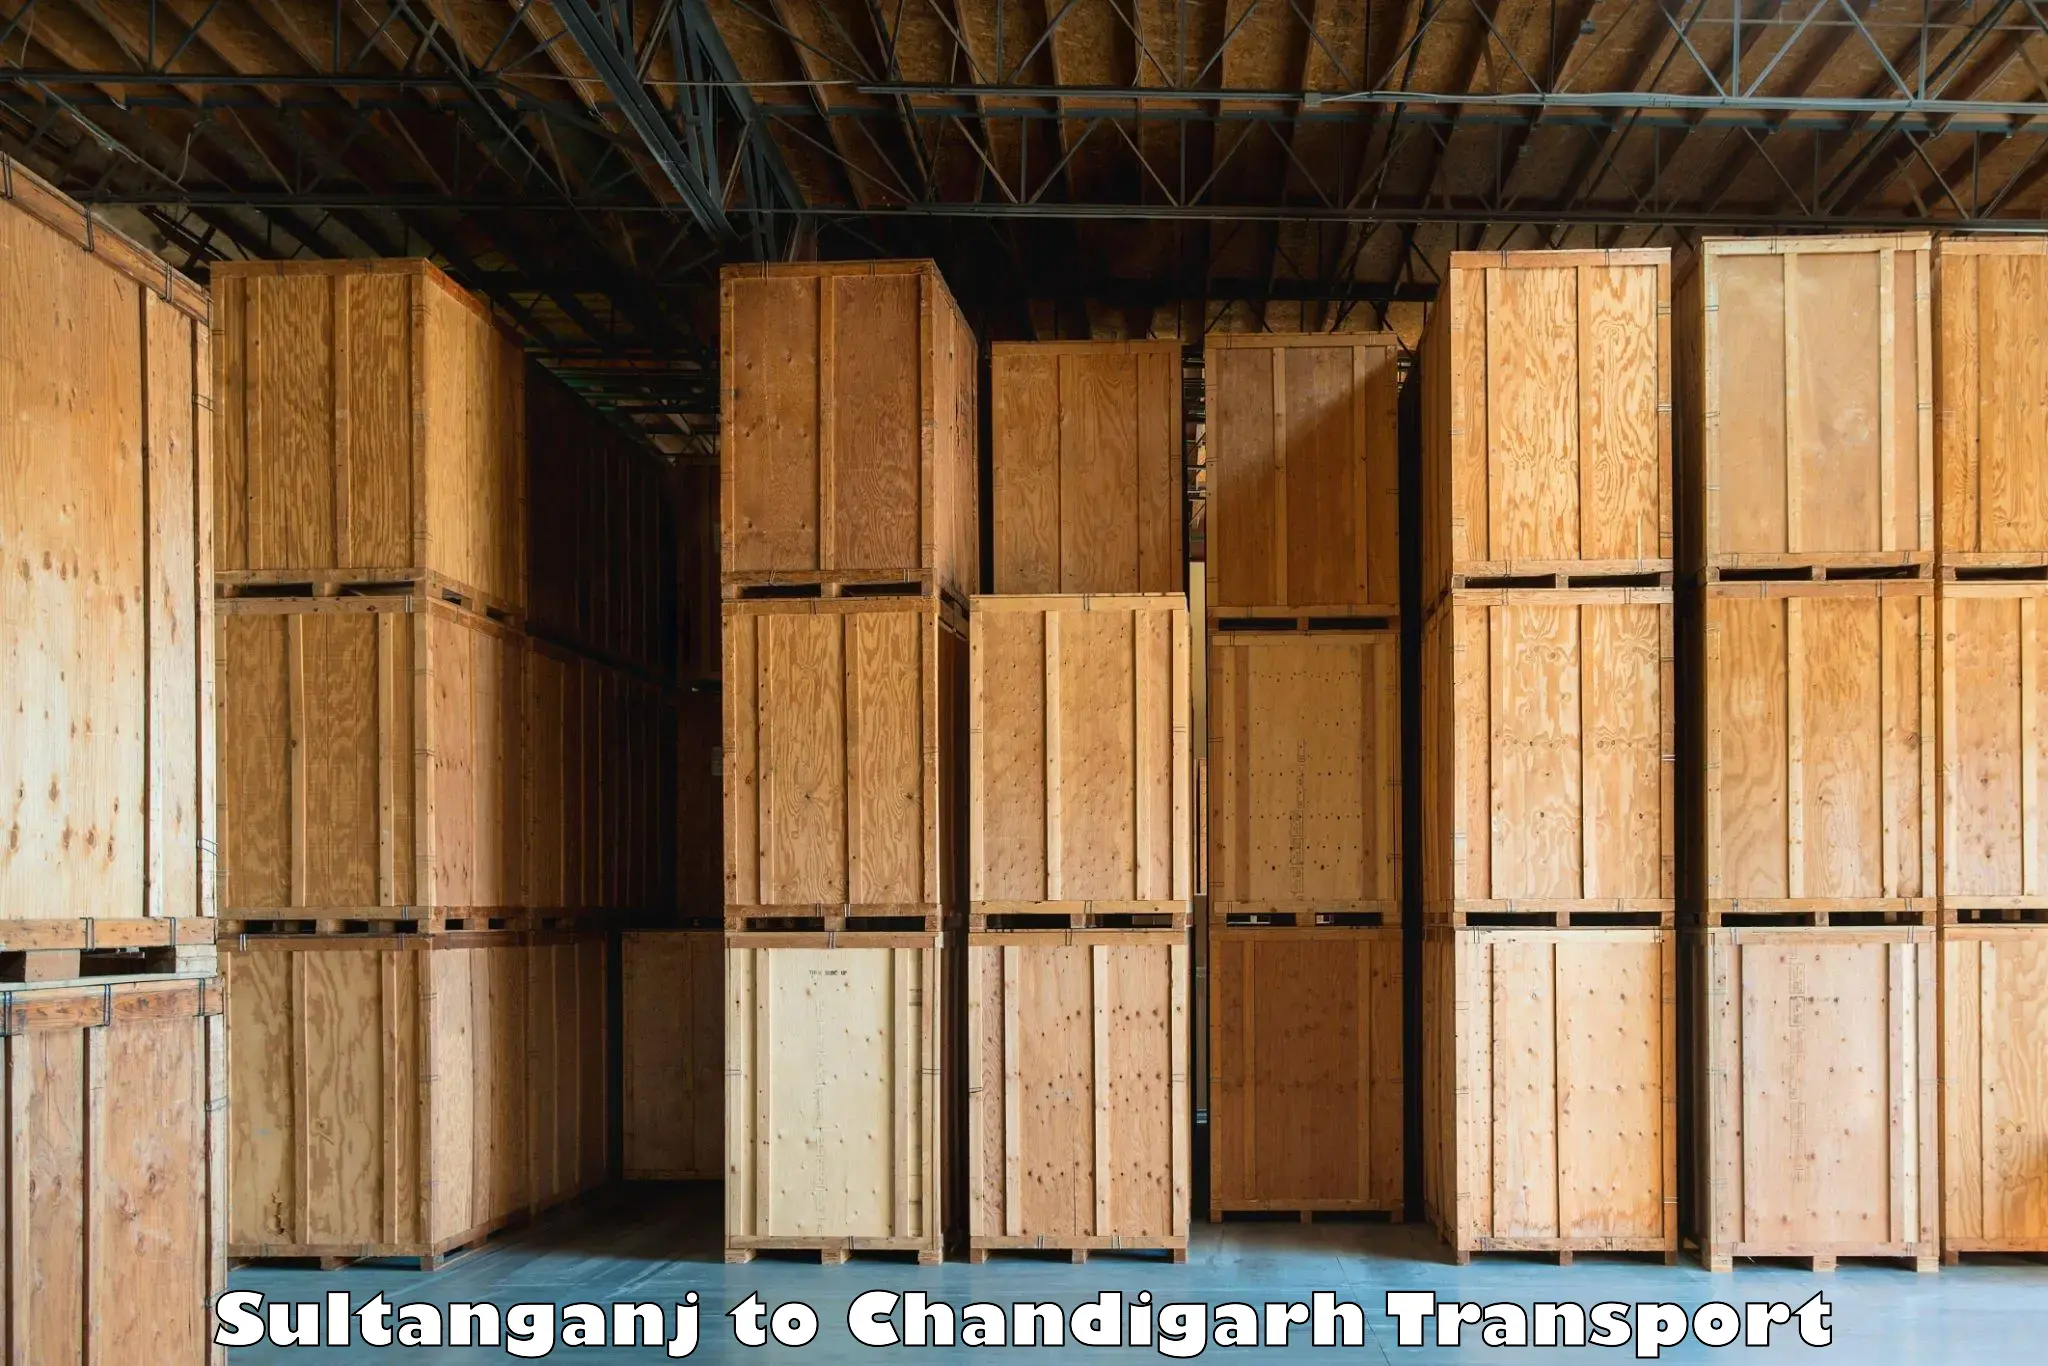 Commercial transport service Sultanganj to Chandigarh